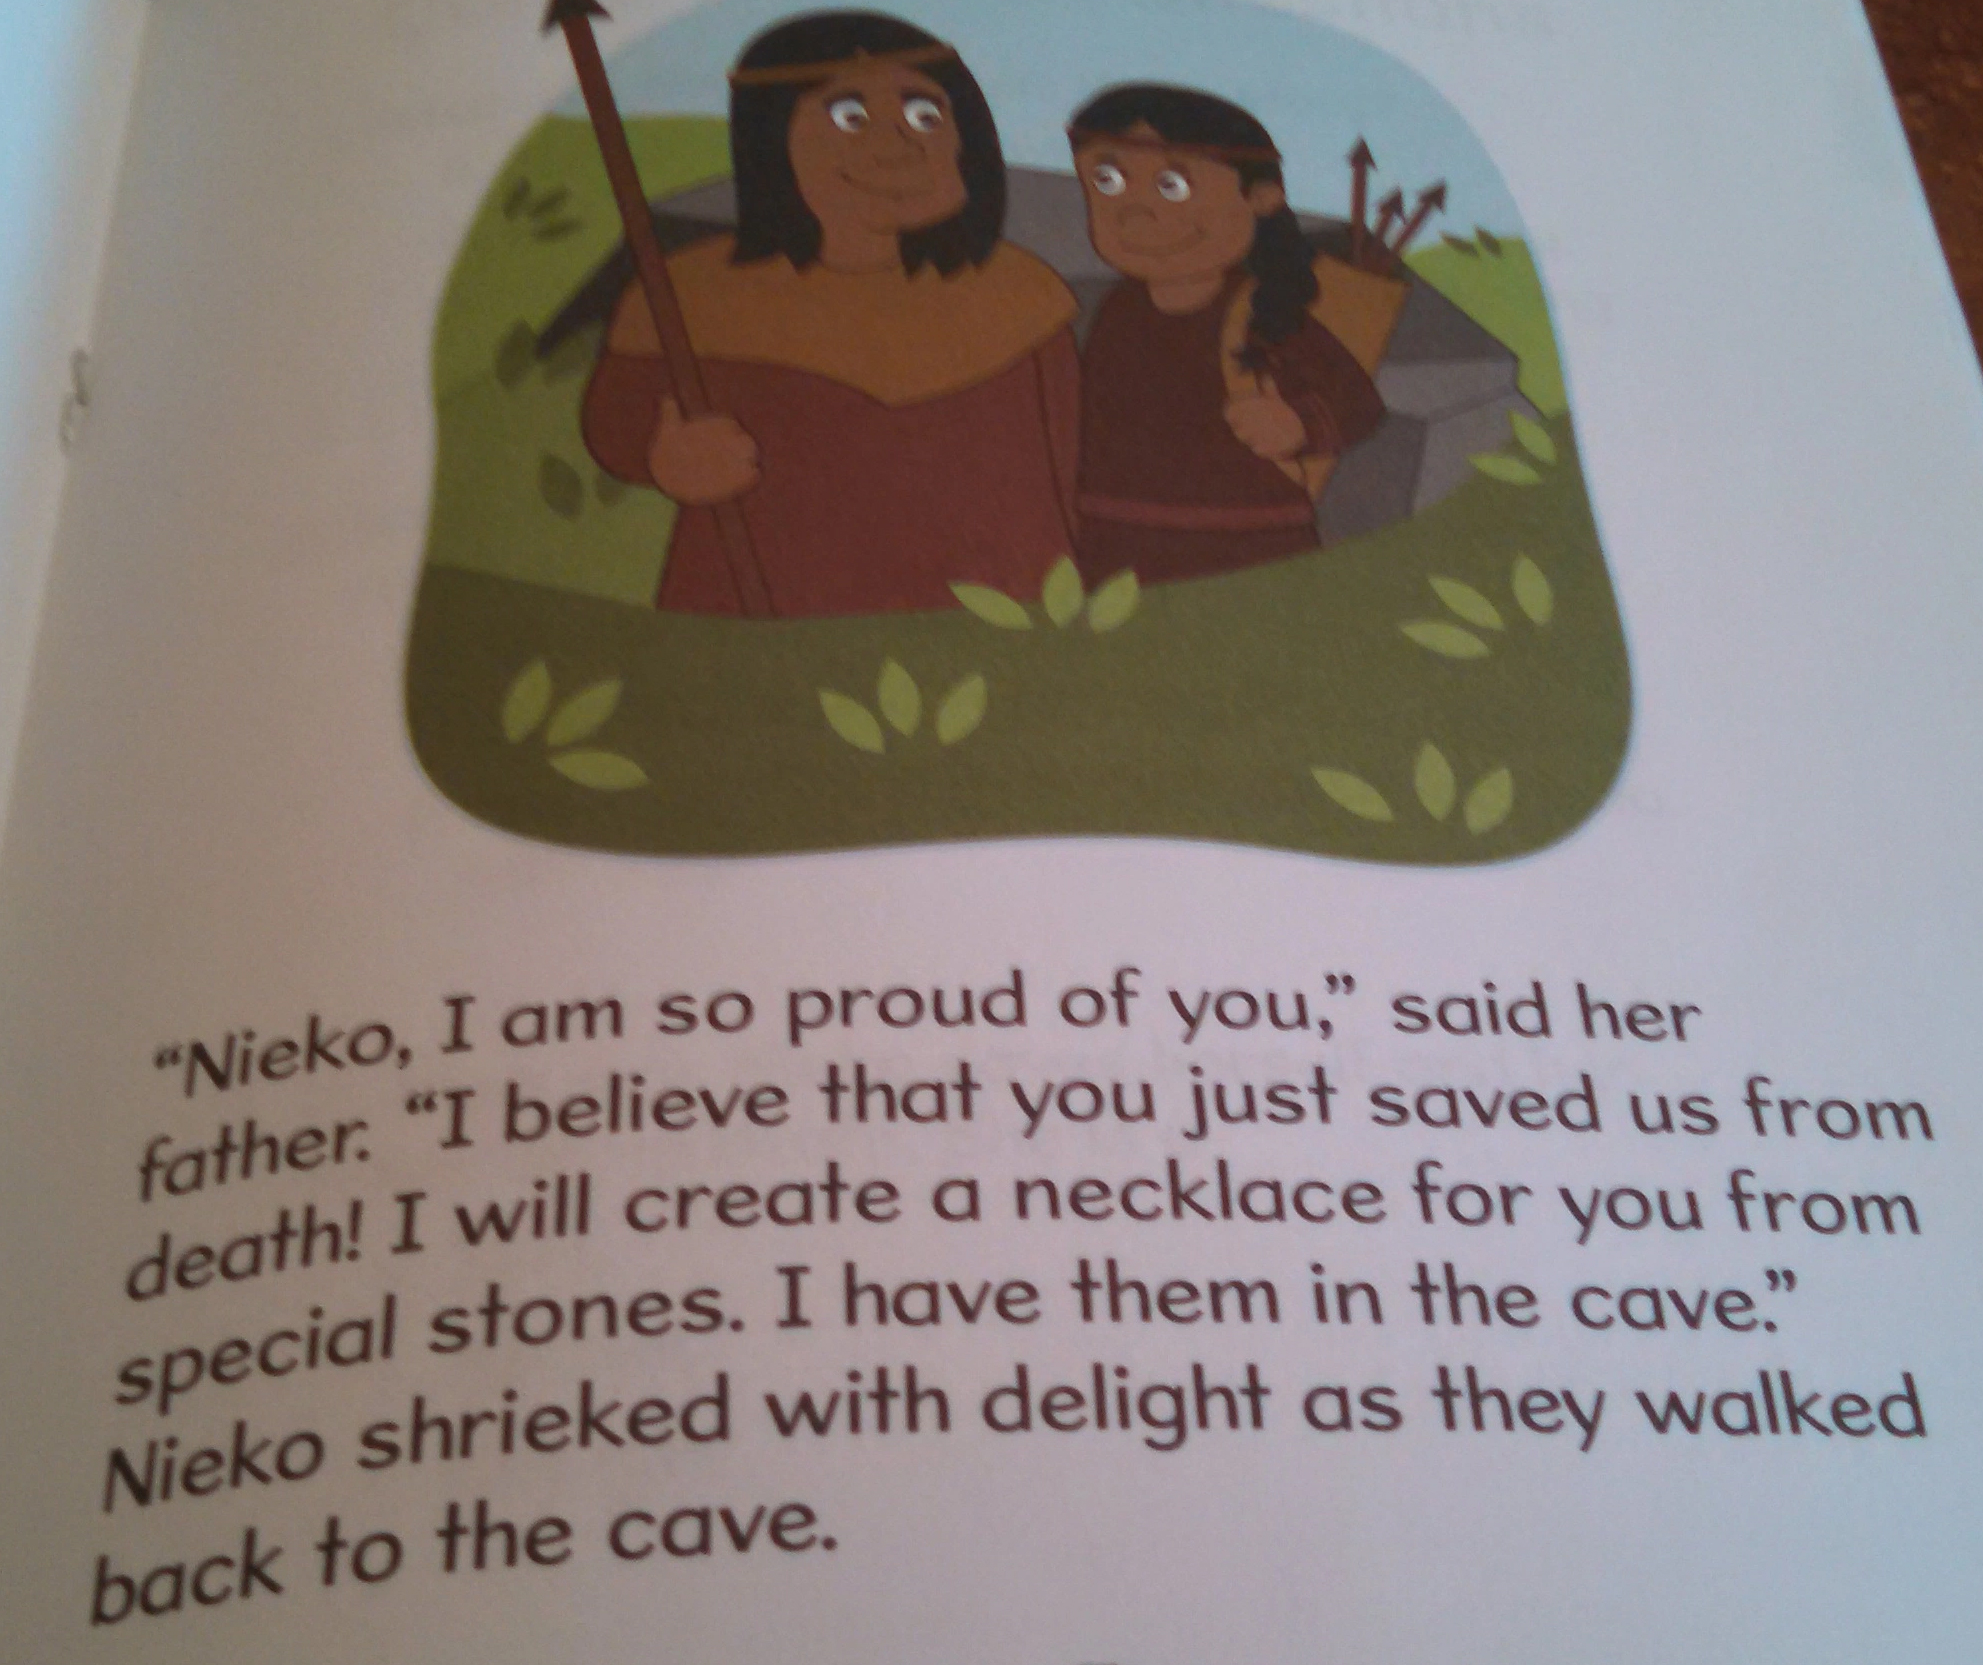 A page from "Nieko the Hunting Girl," one of the books used in an early literacy program. Photo courtesy of Sarah Lahm.